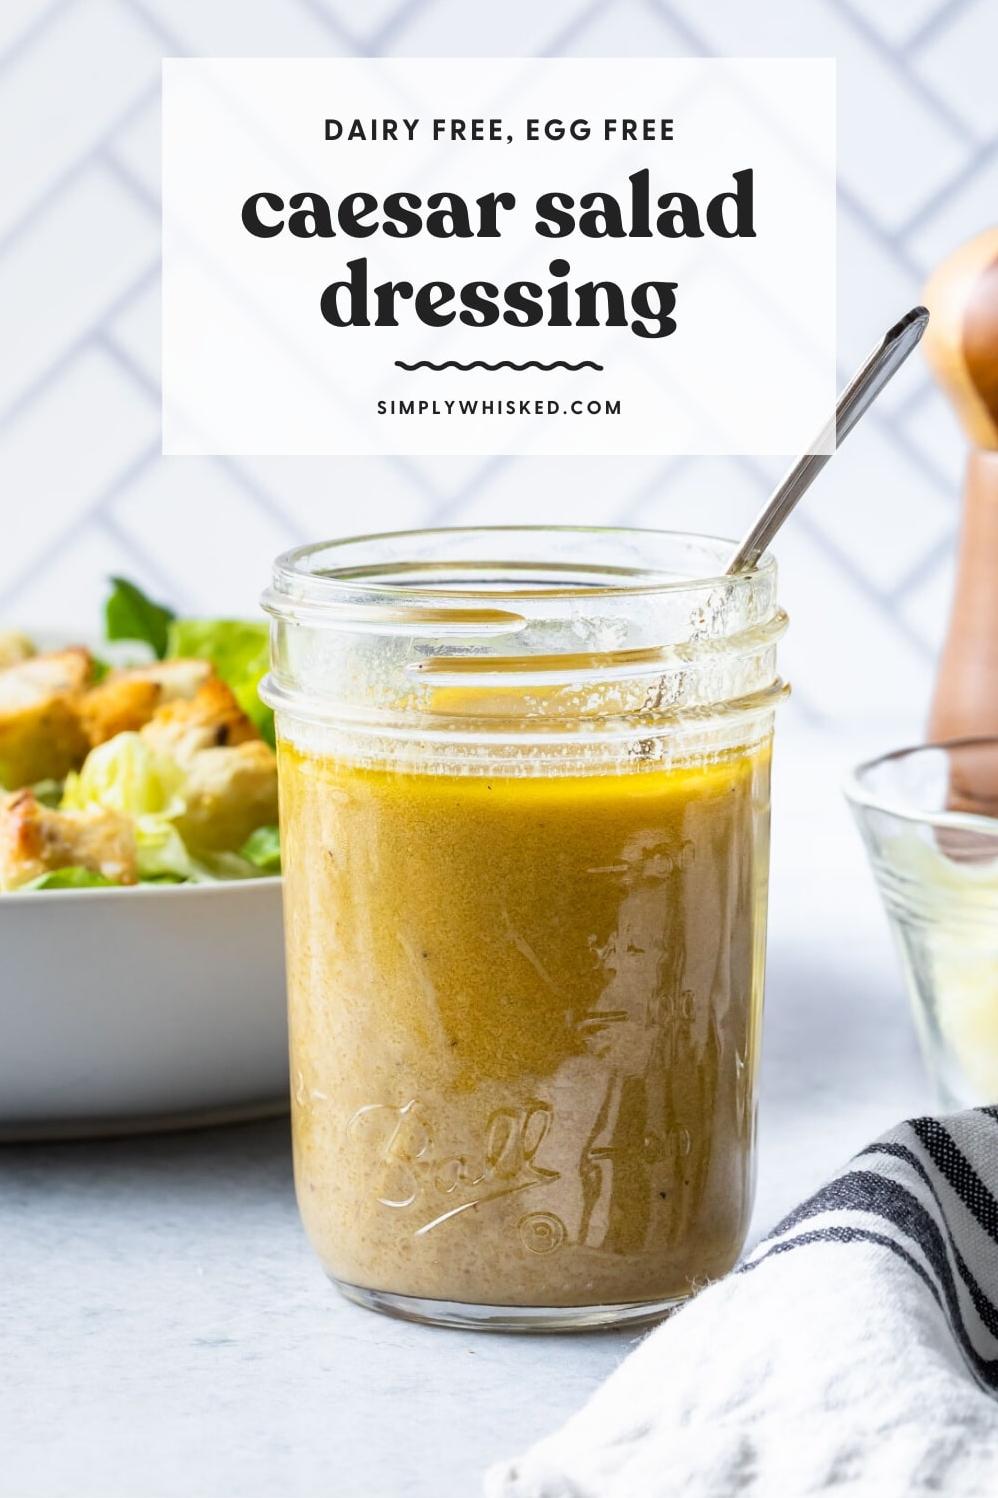  Drizzle this delicious oil and vinegar dressing on your favorite salad for a burst of flavor!